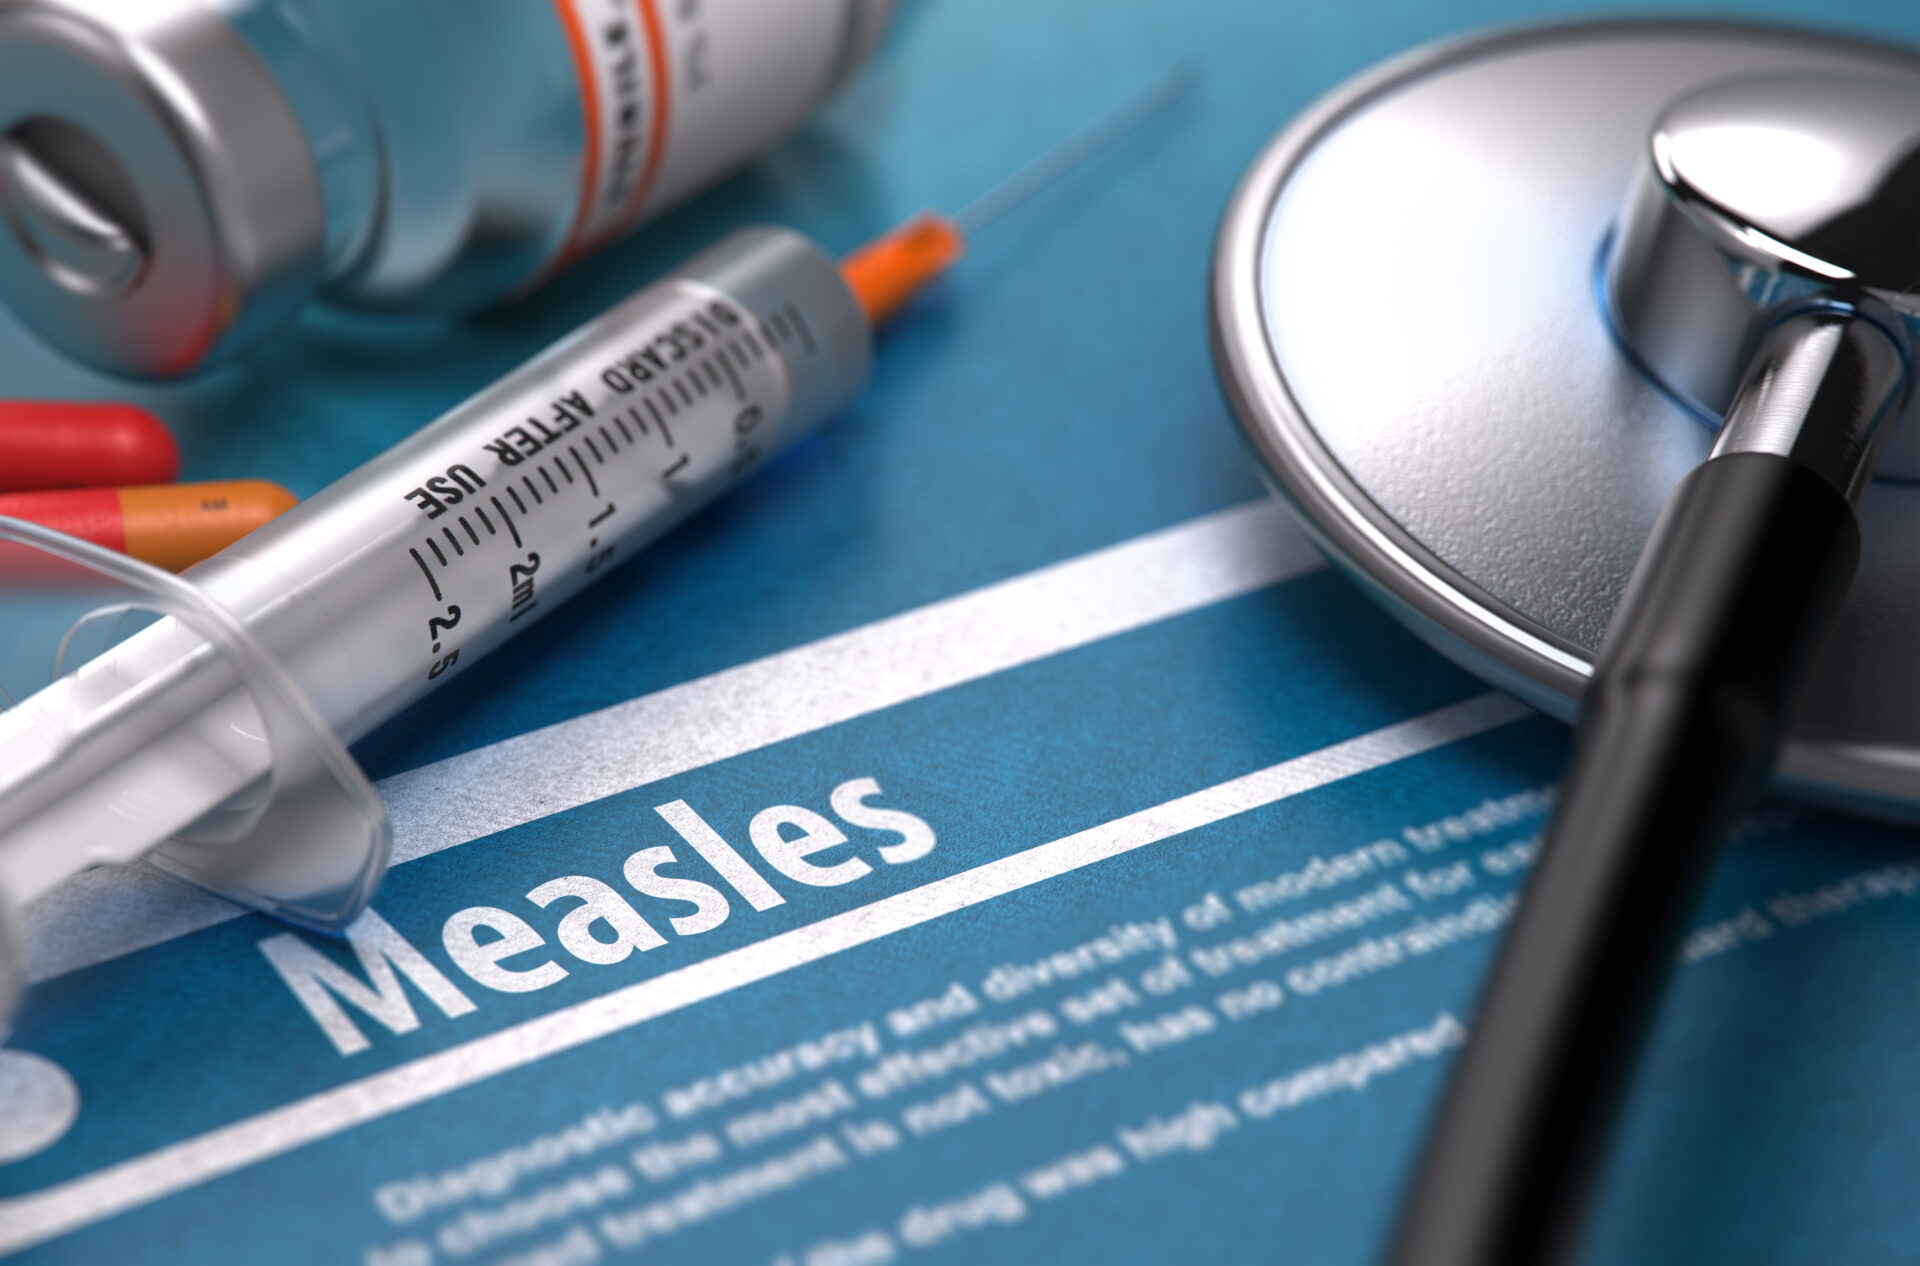 First Measles Case In 15 Years Announced In W.Va.